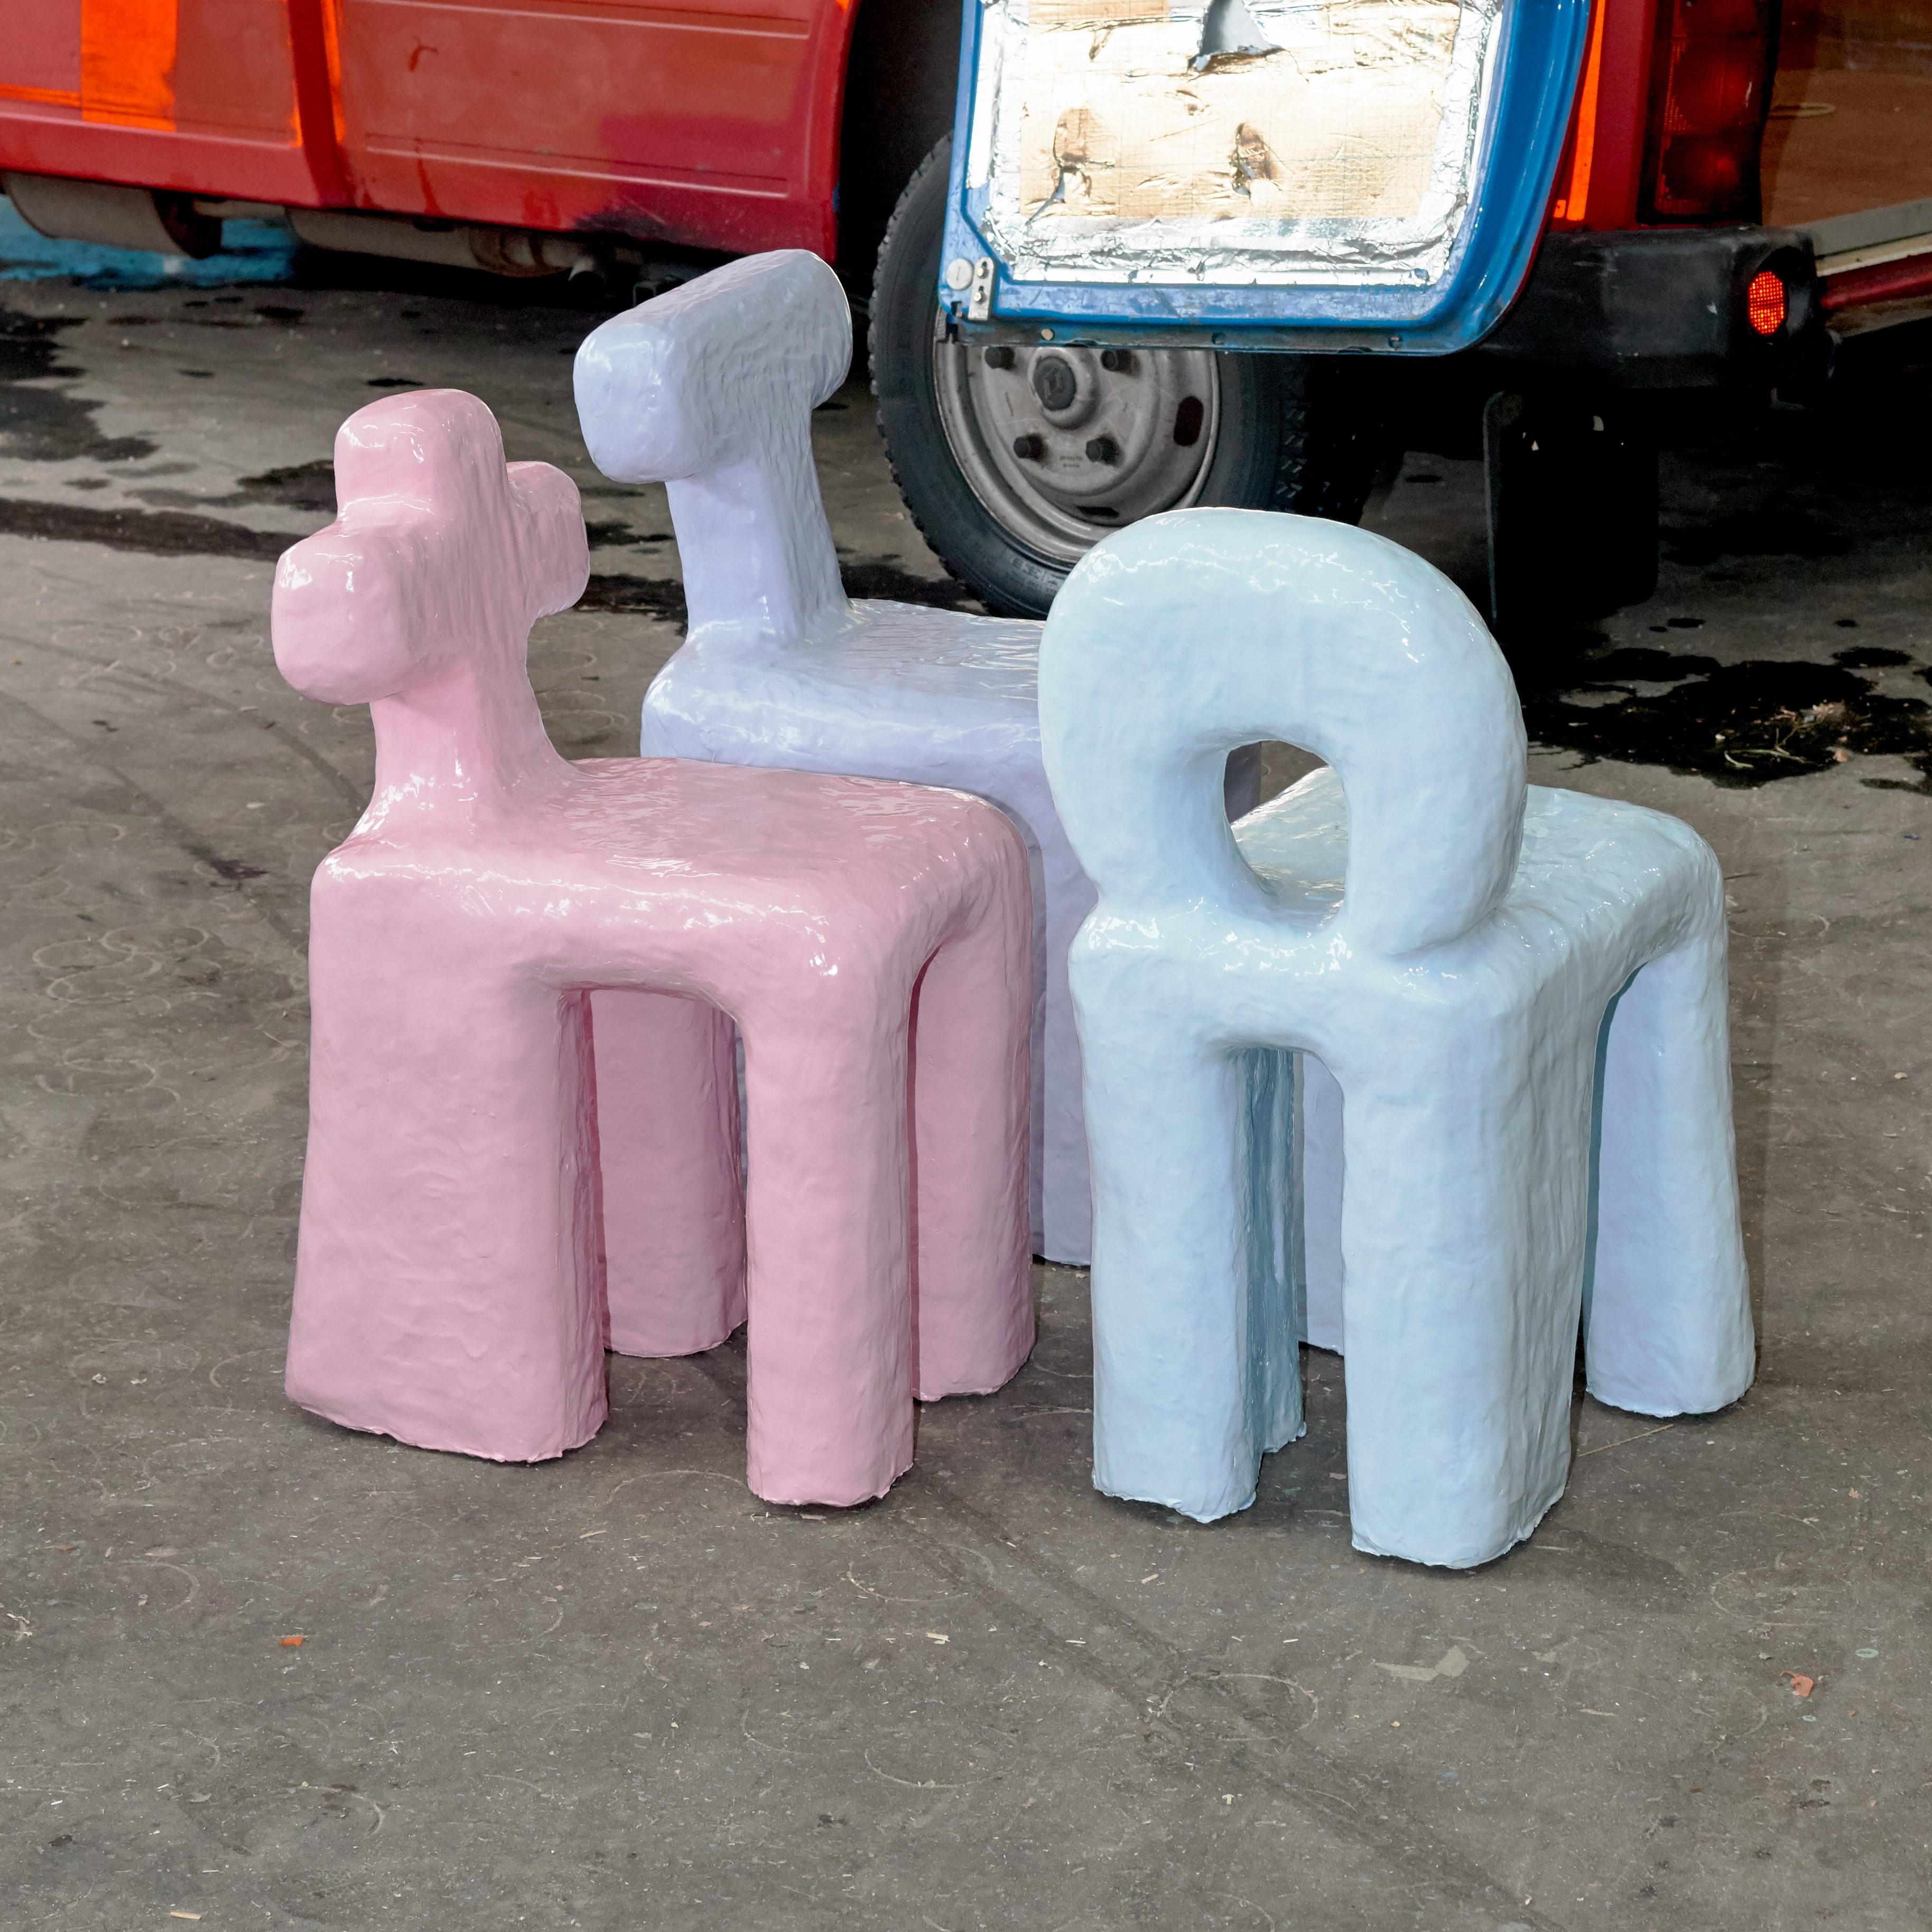 Set of 3 funky stools made in 467 Minutes by Minute Manufacturing
Dimensions: 42 x 42 x 56 cm
Materials: Waste materials
Such as cardboard tubes, plastic boxes, leather, clay

Minute Manufacturing is a production system that makes objects by